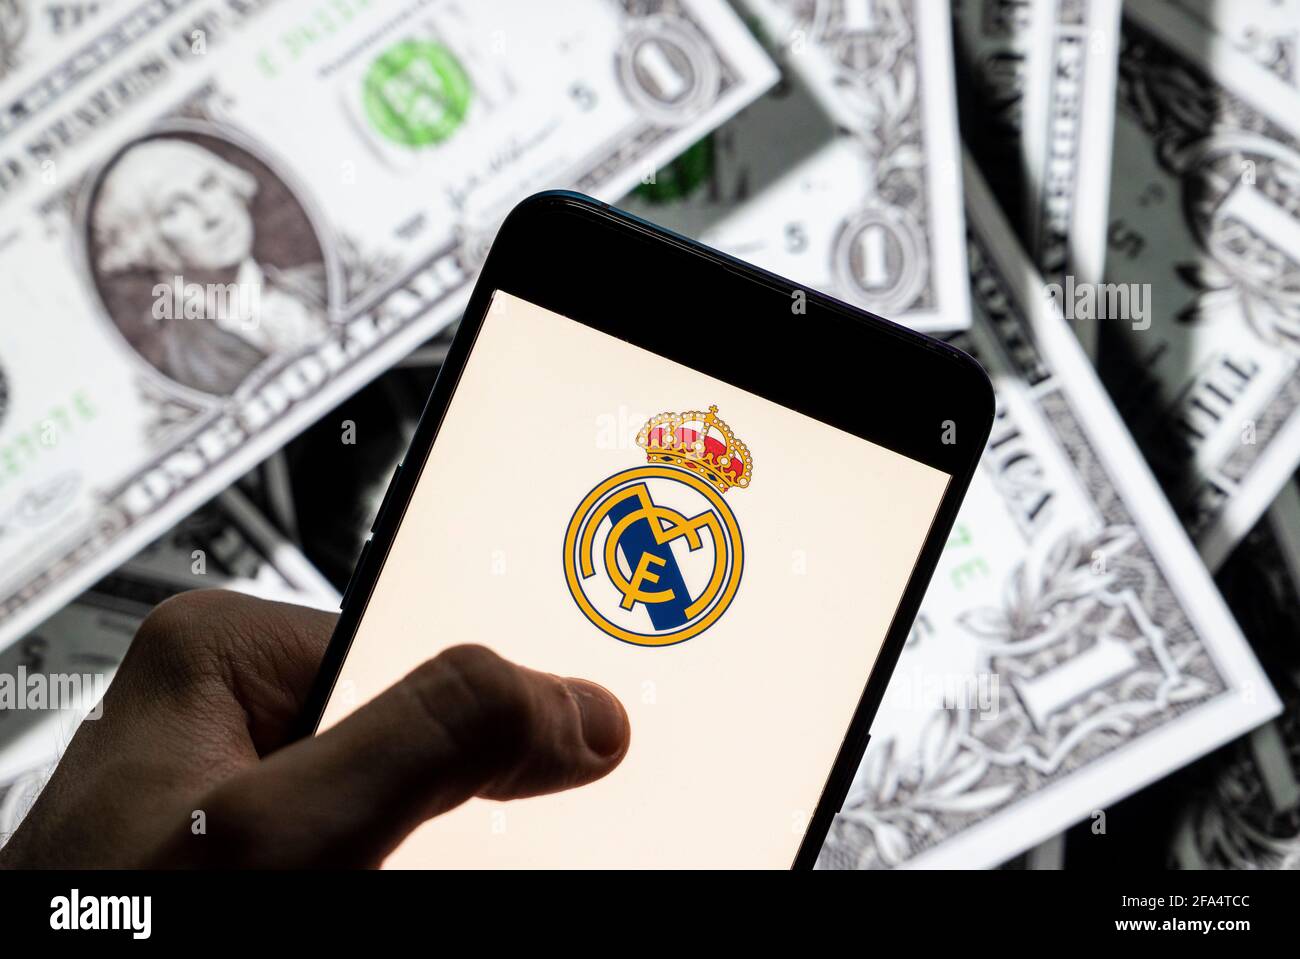 In this photo illustration Spanish professional football club team Real Madrid Club de Fútbol commonly known as Real Madrid logo seen on an Android mobile device screen with the currency of the United States dollar icon, $ icon symbol in the background. Stock Photo